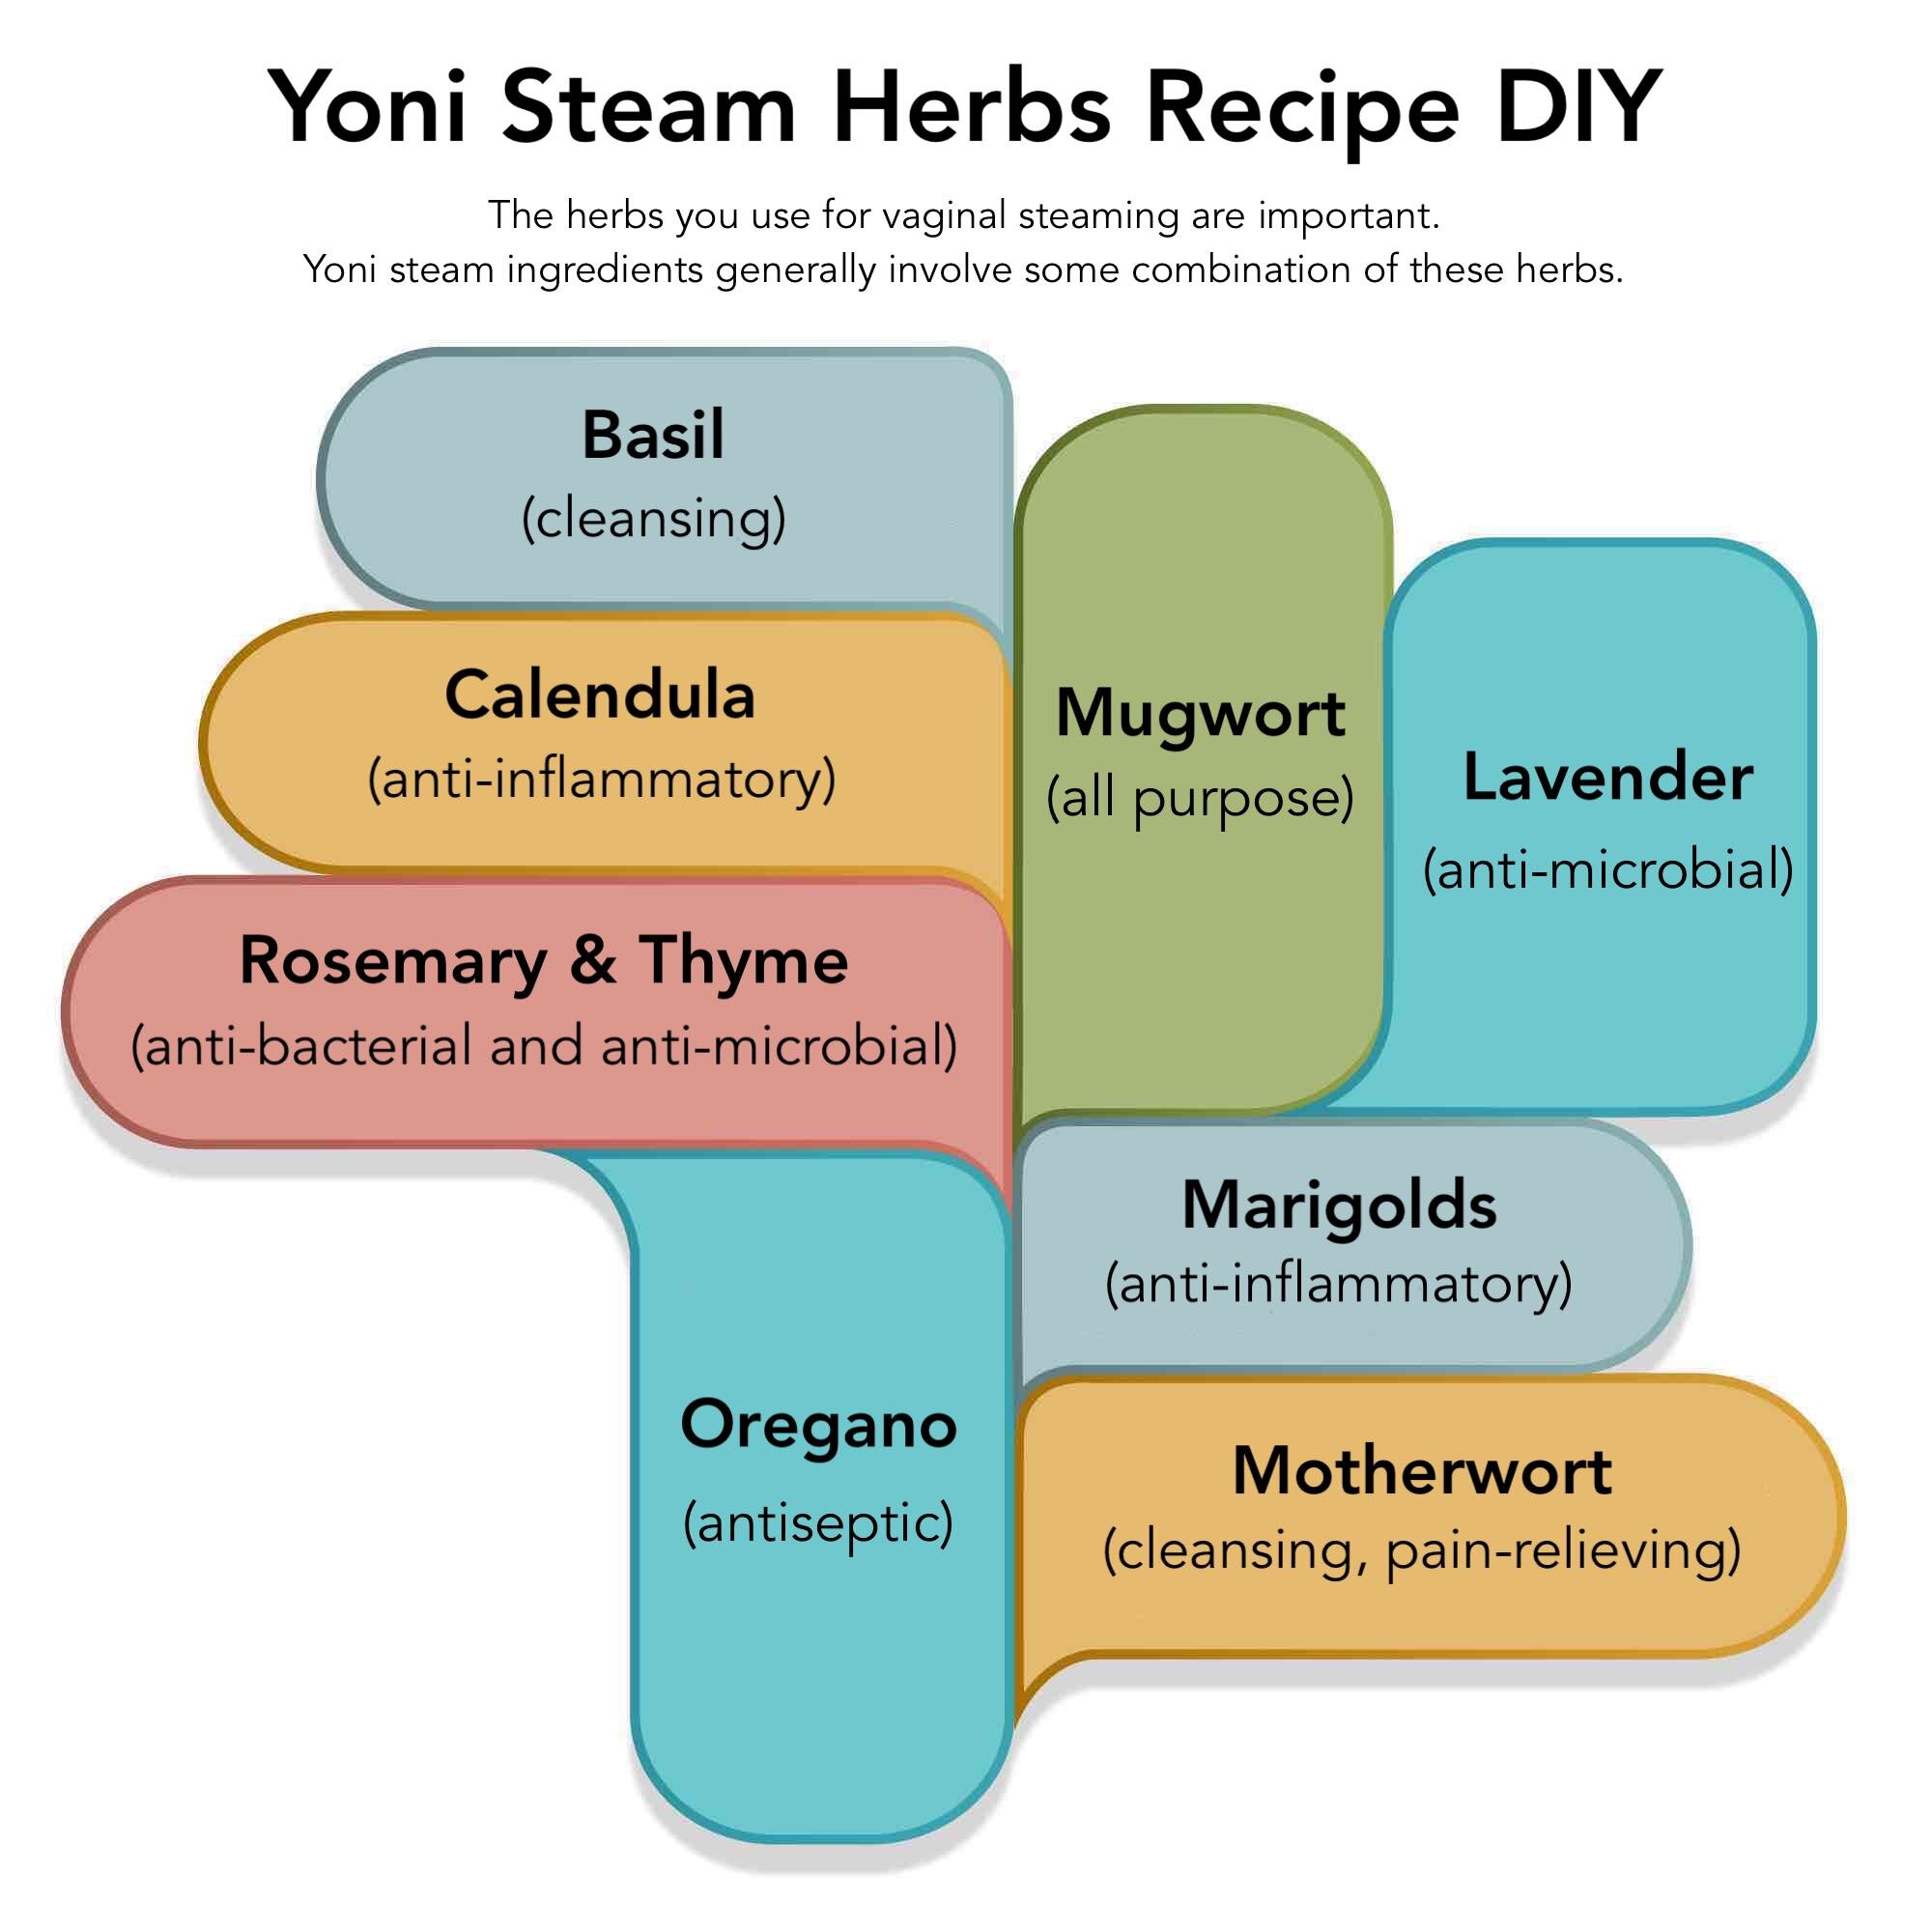 Yoni steam ingredients generally involve some combination of the following ...